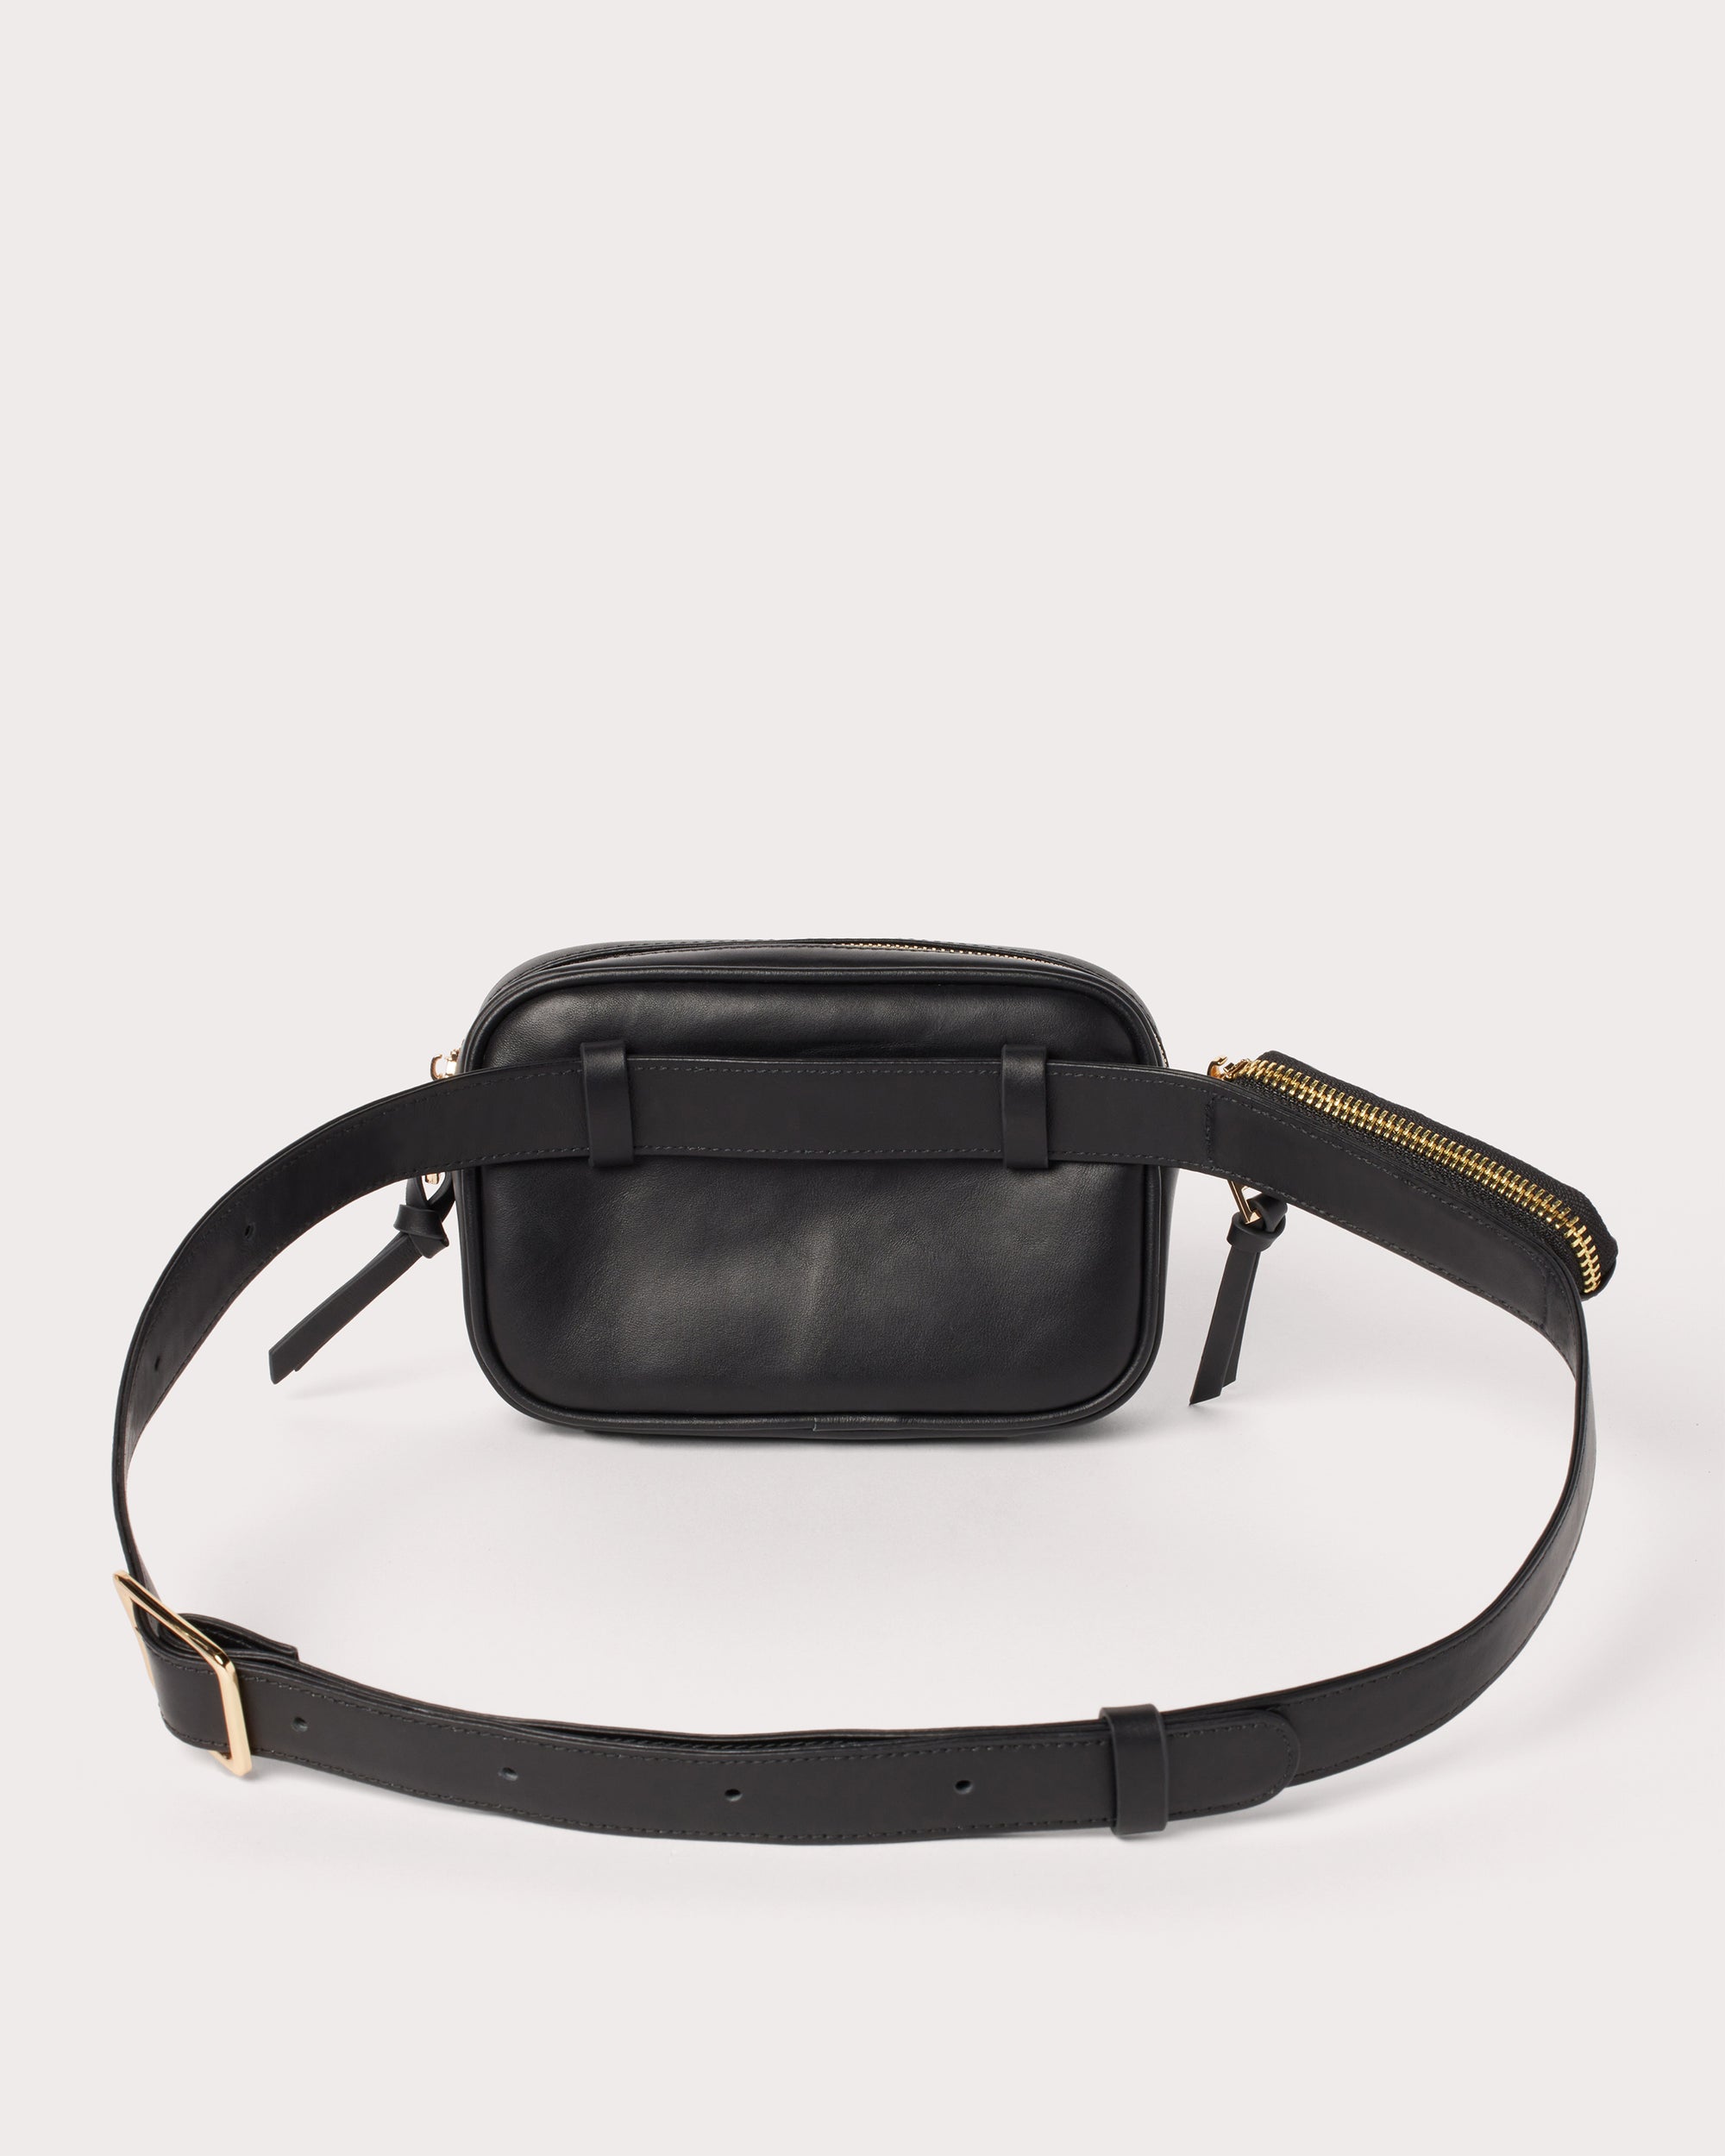 The Sydney  Genuine Leather Waist Bag with Built-In Lipstick Pouch Ad -  HOLSTERE